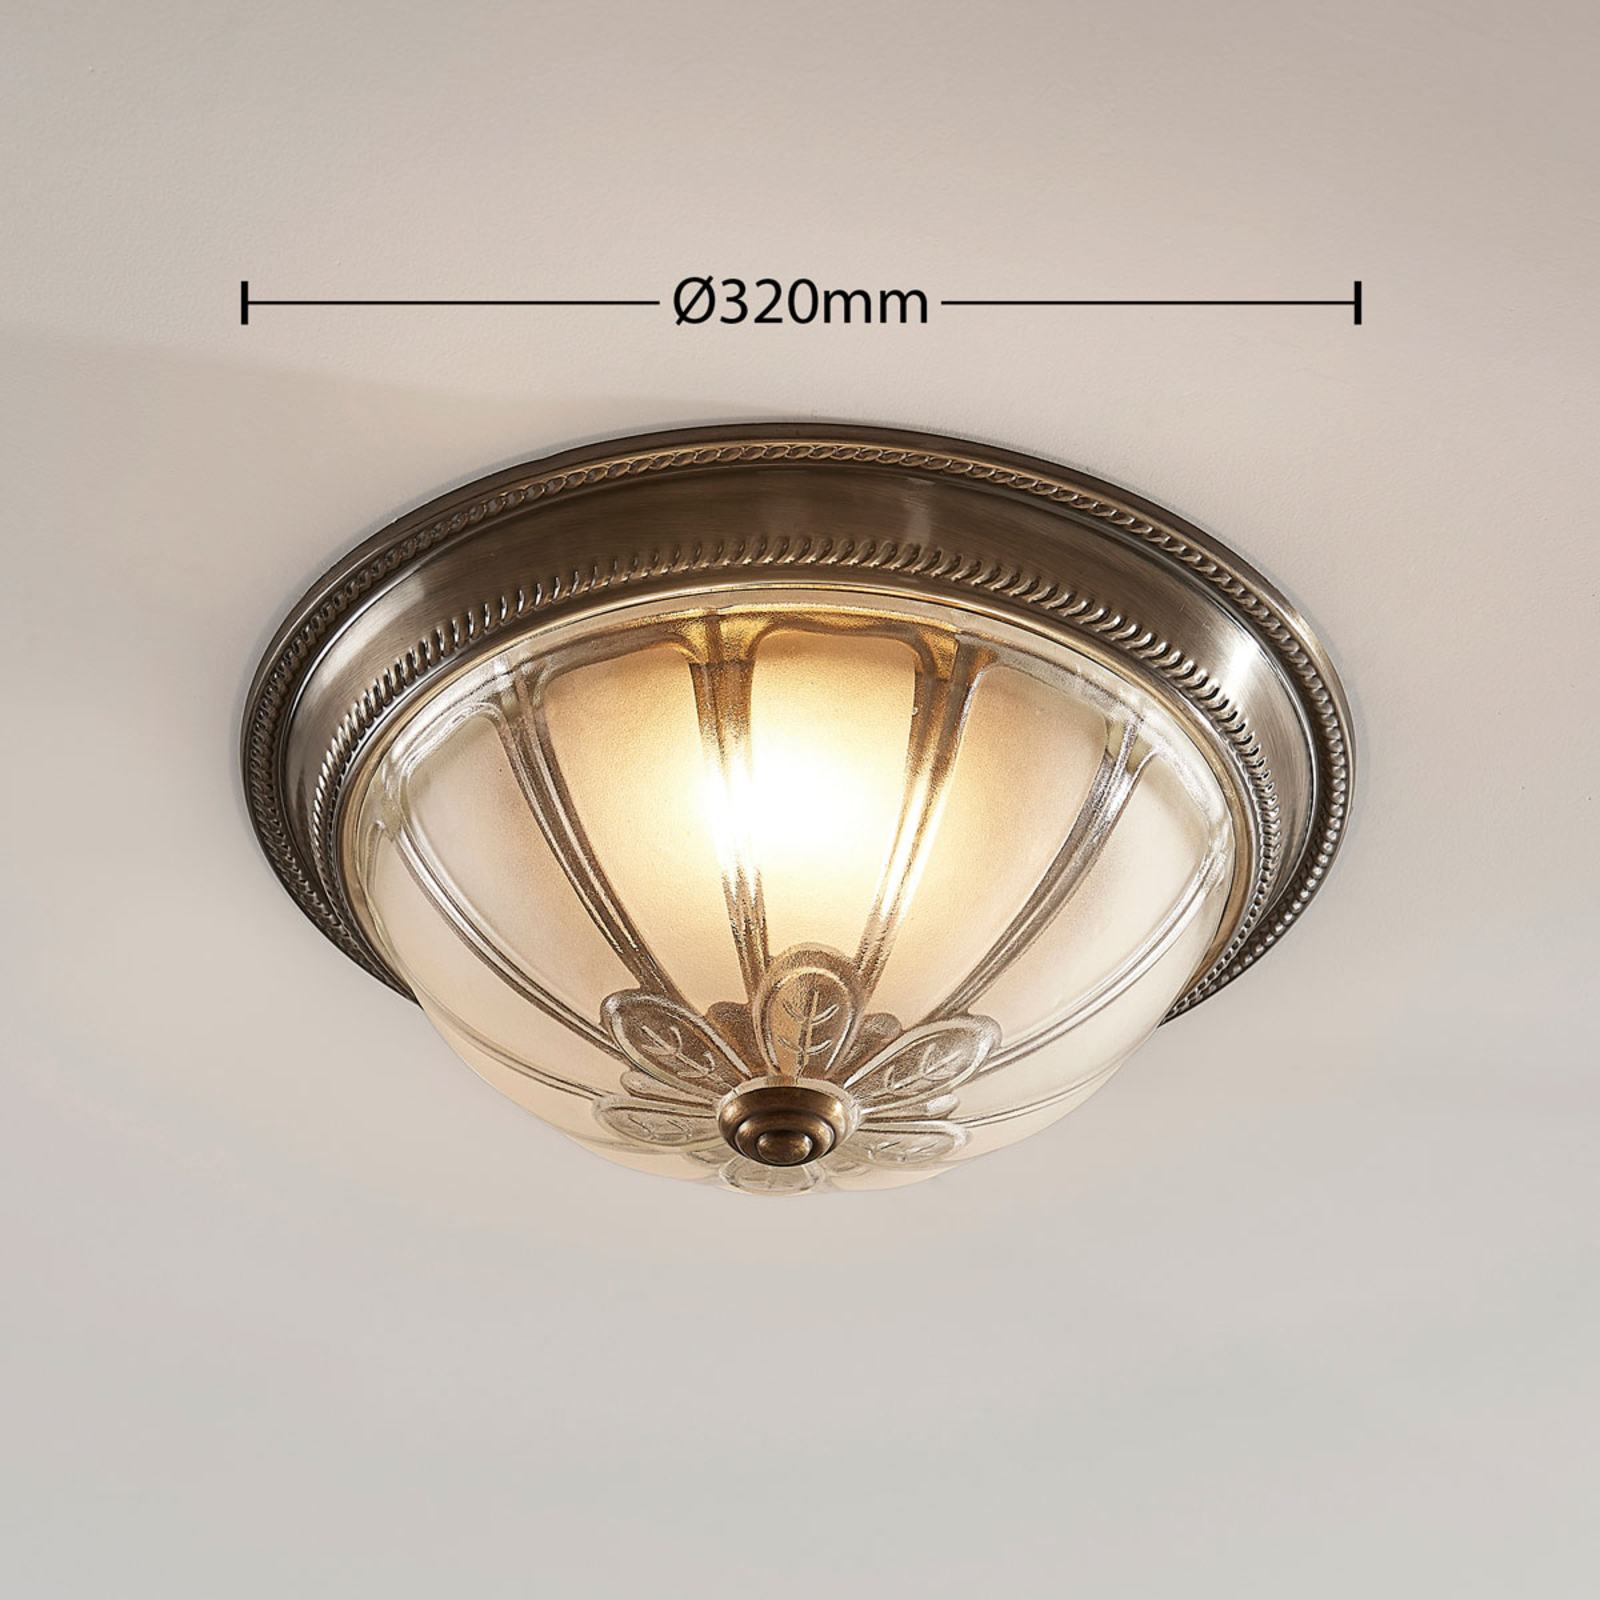 Henja round LED ceiling light, 3-stage dimmable